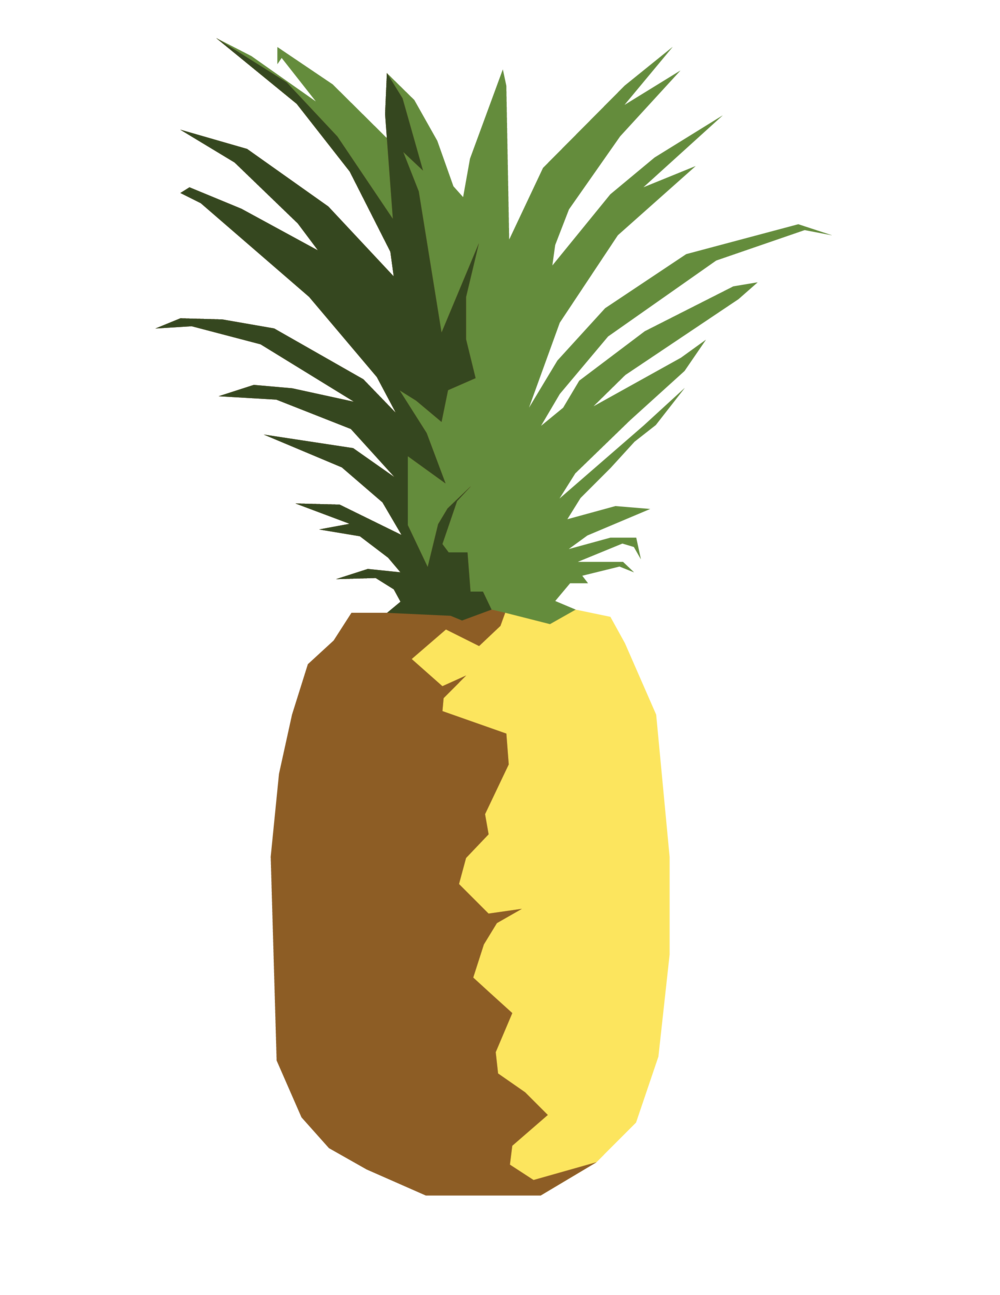 Palm clipart pineapple. Fruit snack carrier joohee